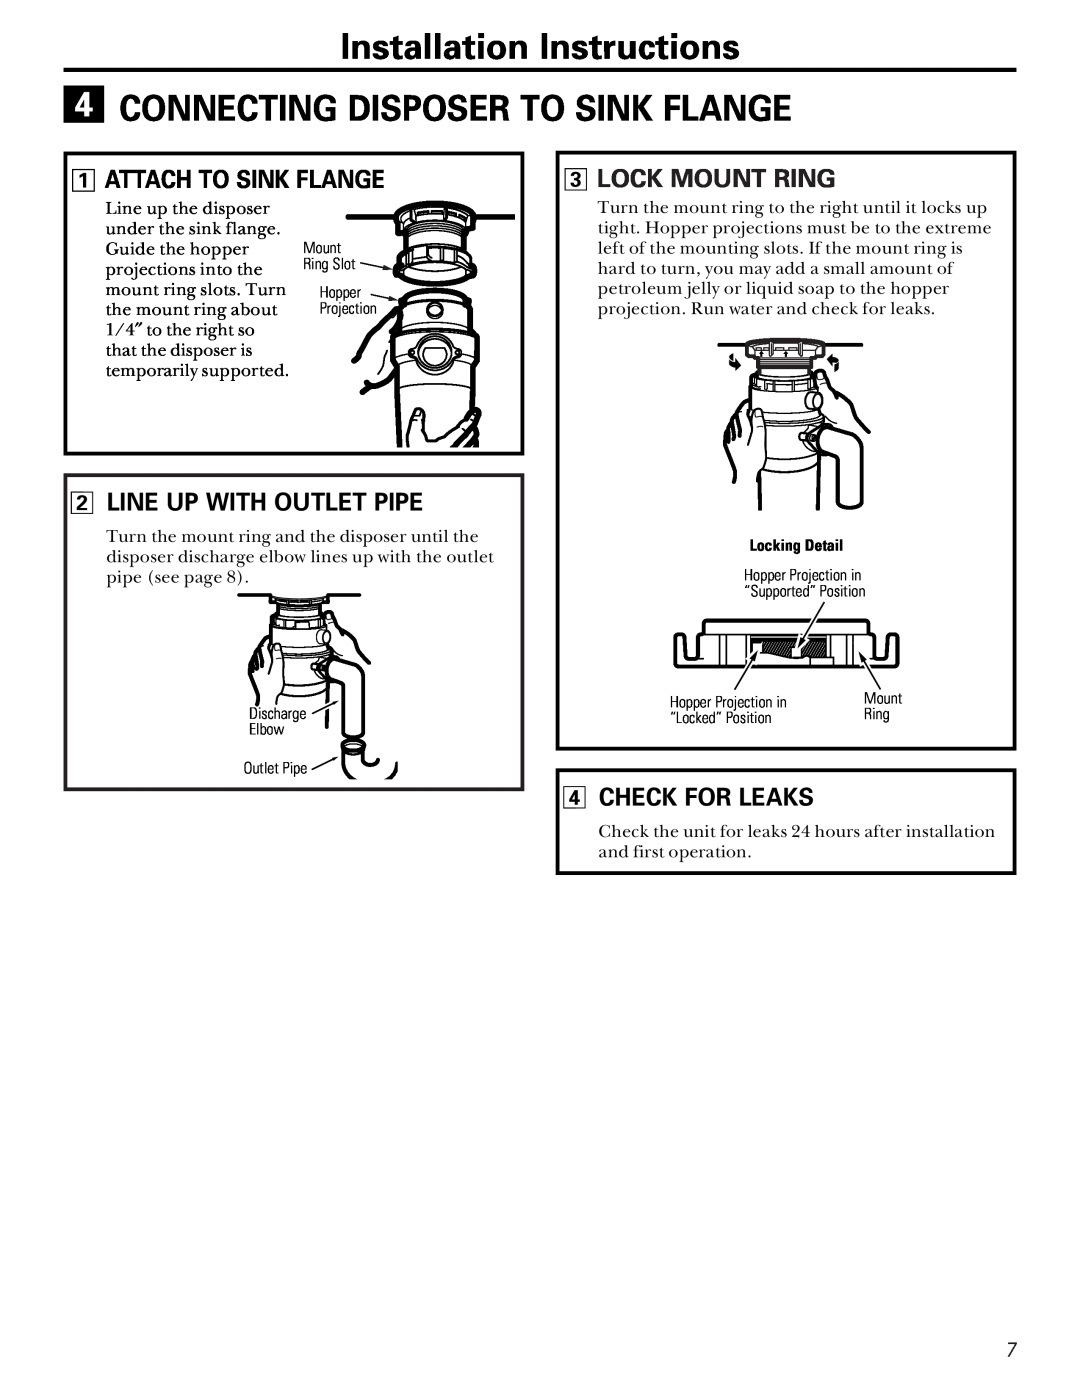 GE GFC300F Installation Instructions 4 CONNECTING DISPOSER TO SINK FLANGE, Attach To Sink Flange, Lock Mount Ring 